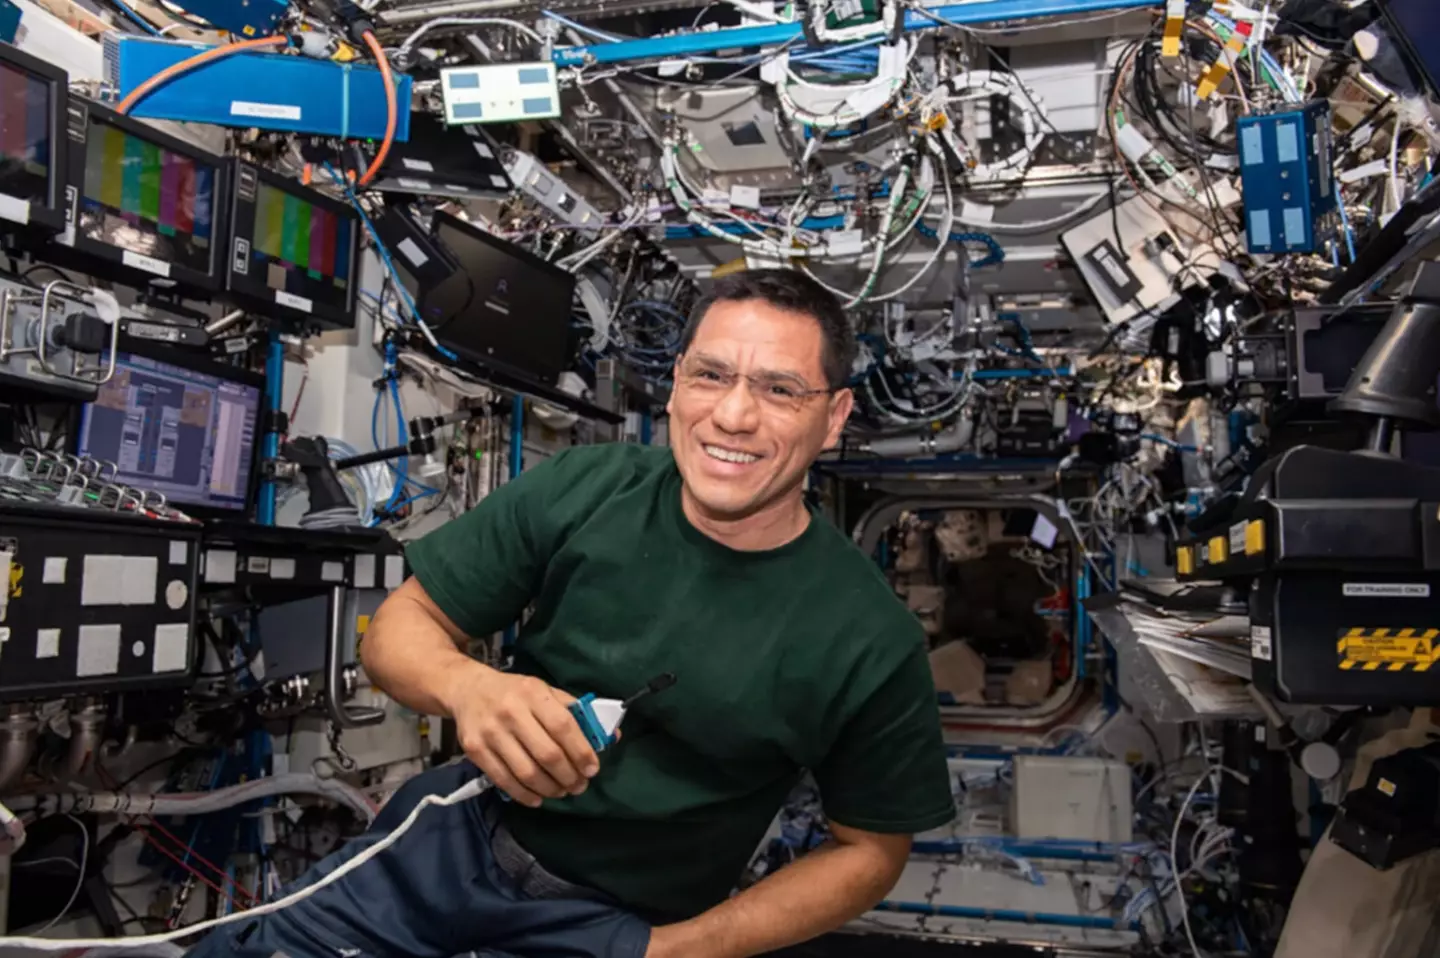 NASA astronaut Frank Rubio was in space for 371 days.